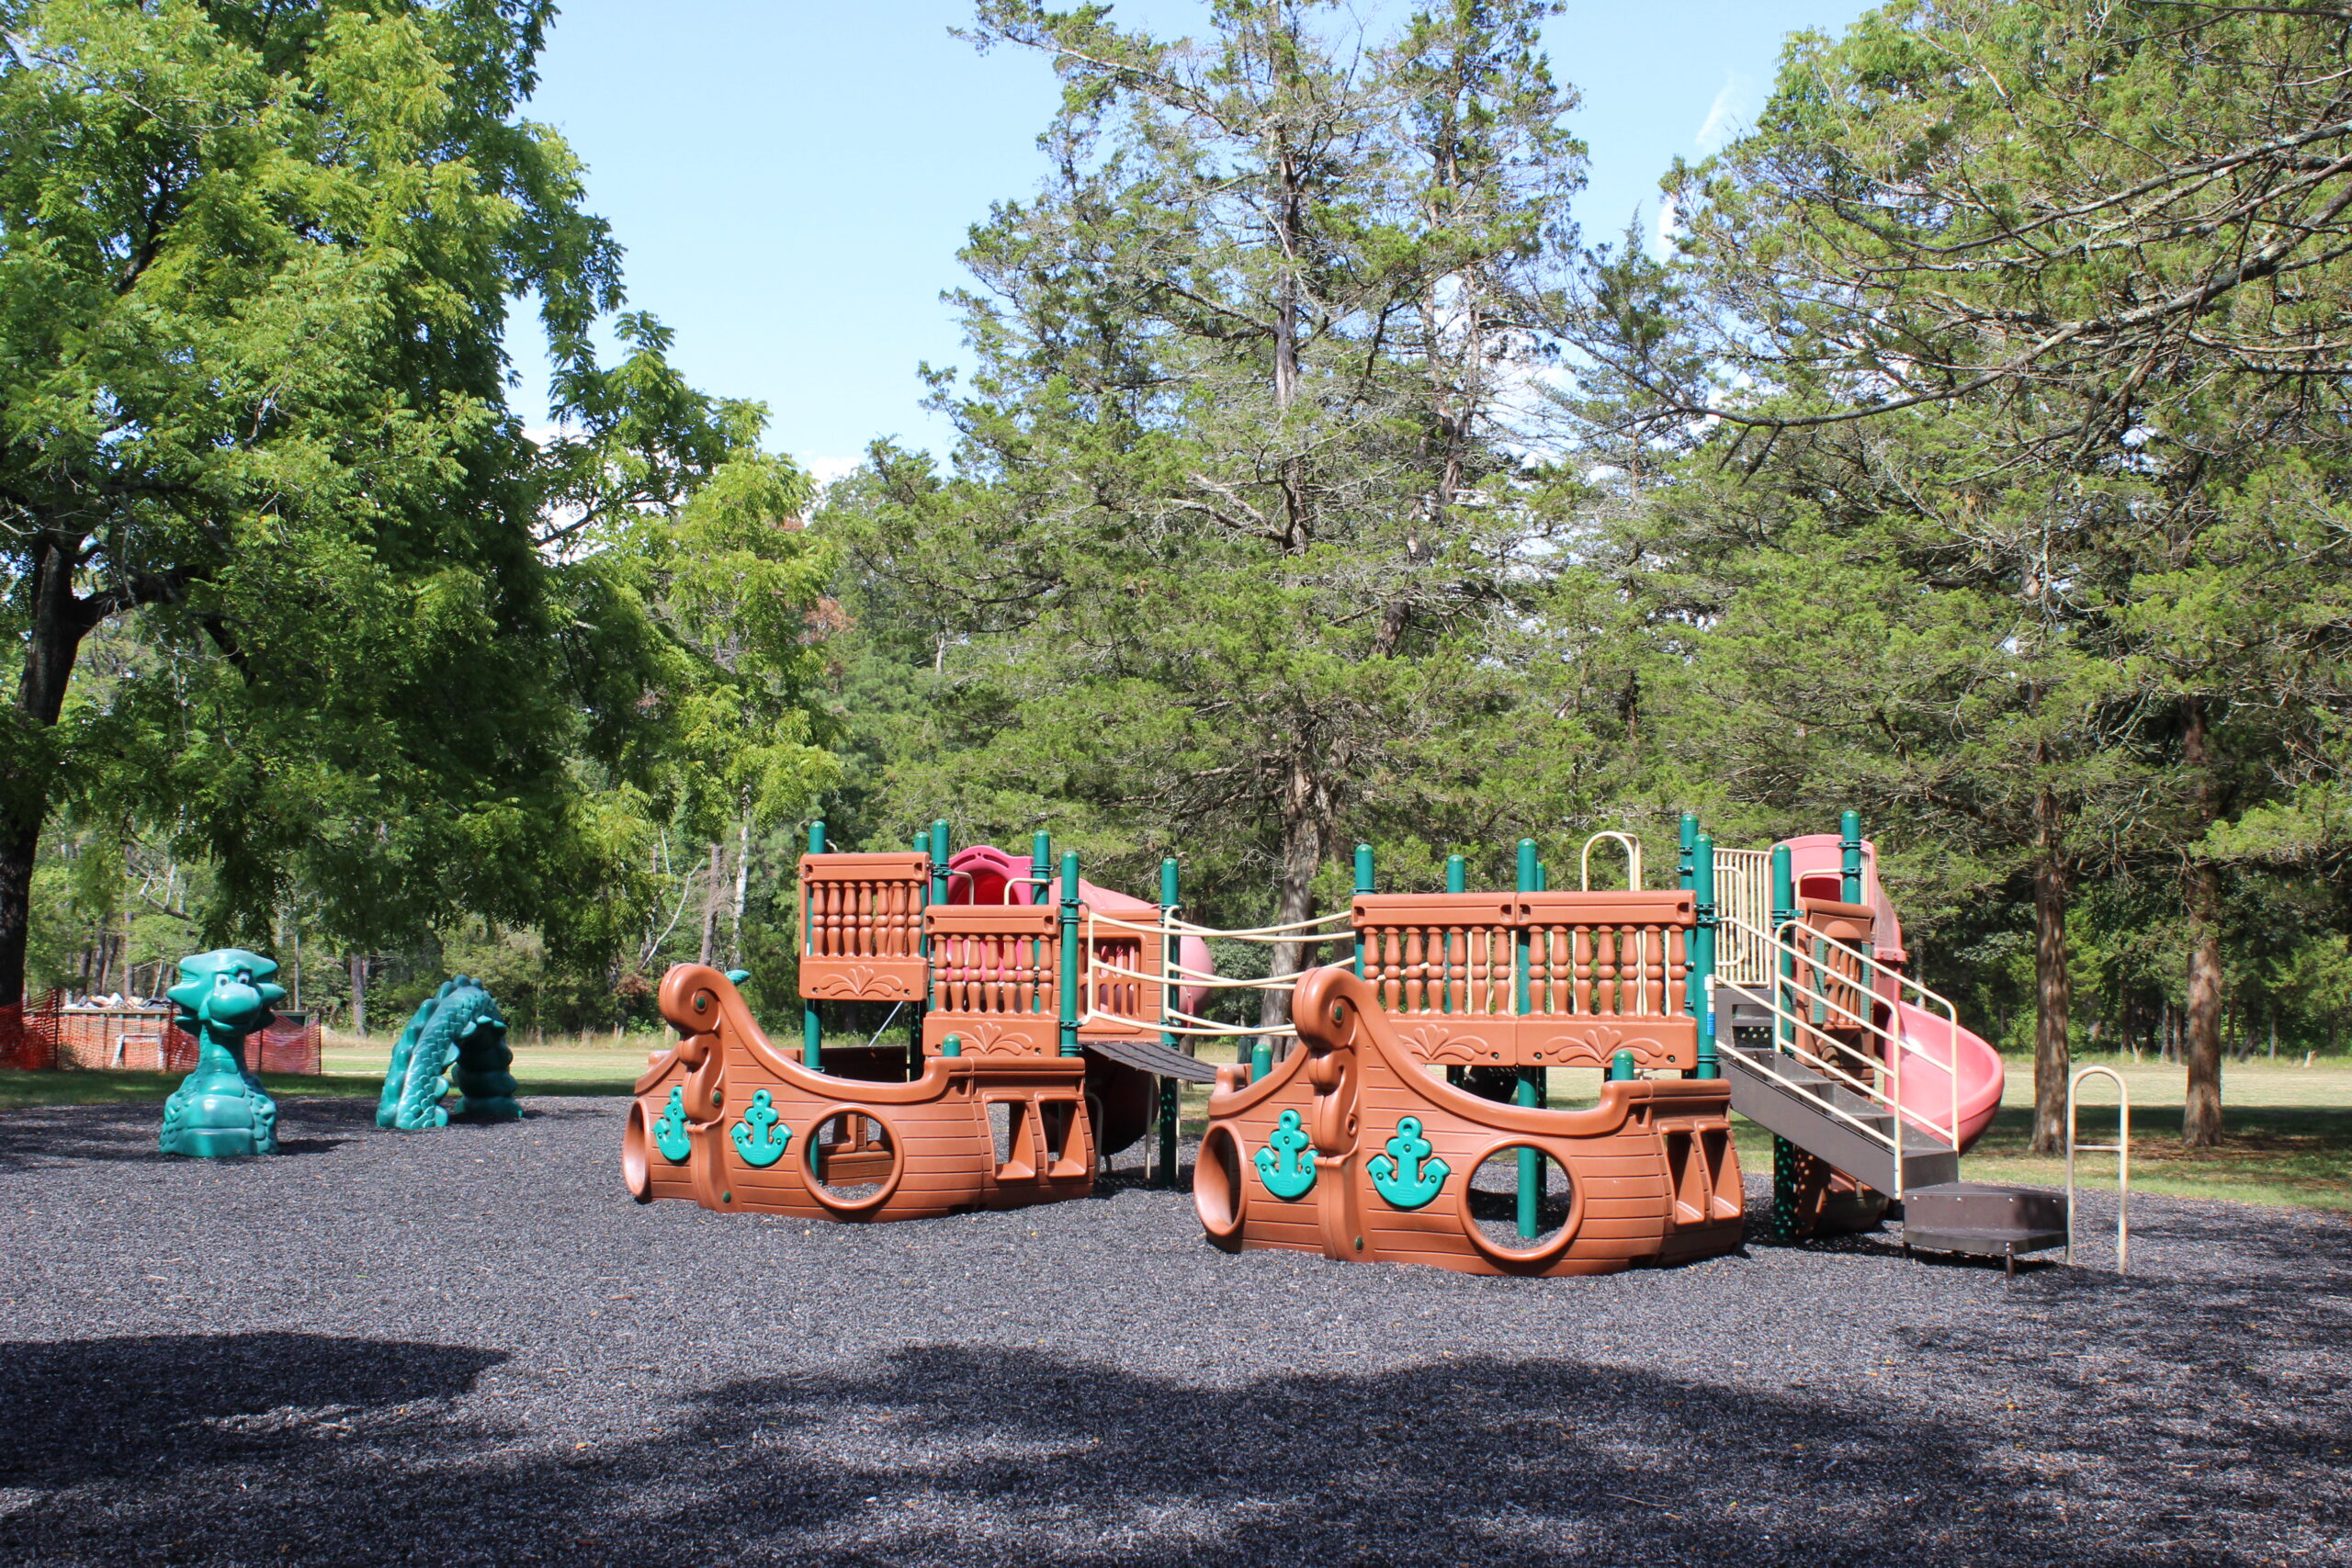 Back Estell Manor Park Playgrounds in Mays Landing NJ - WIDE image - pirate ship playground with sea serpent